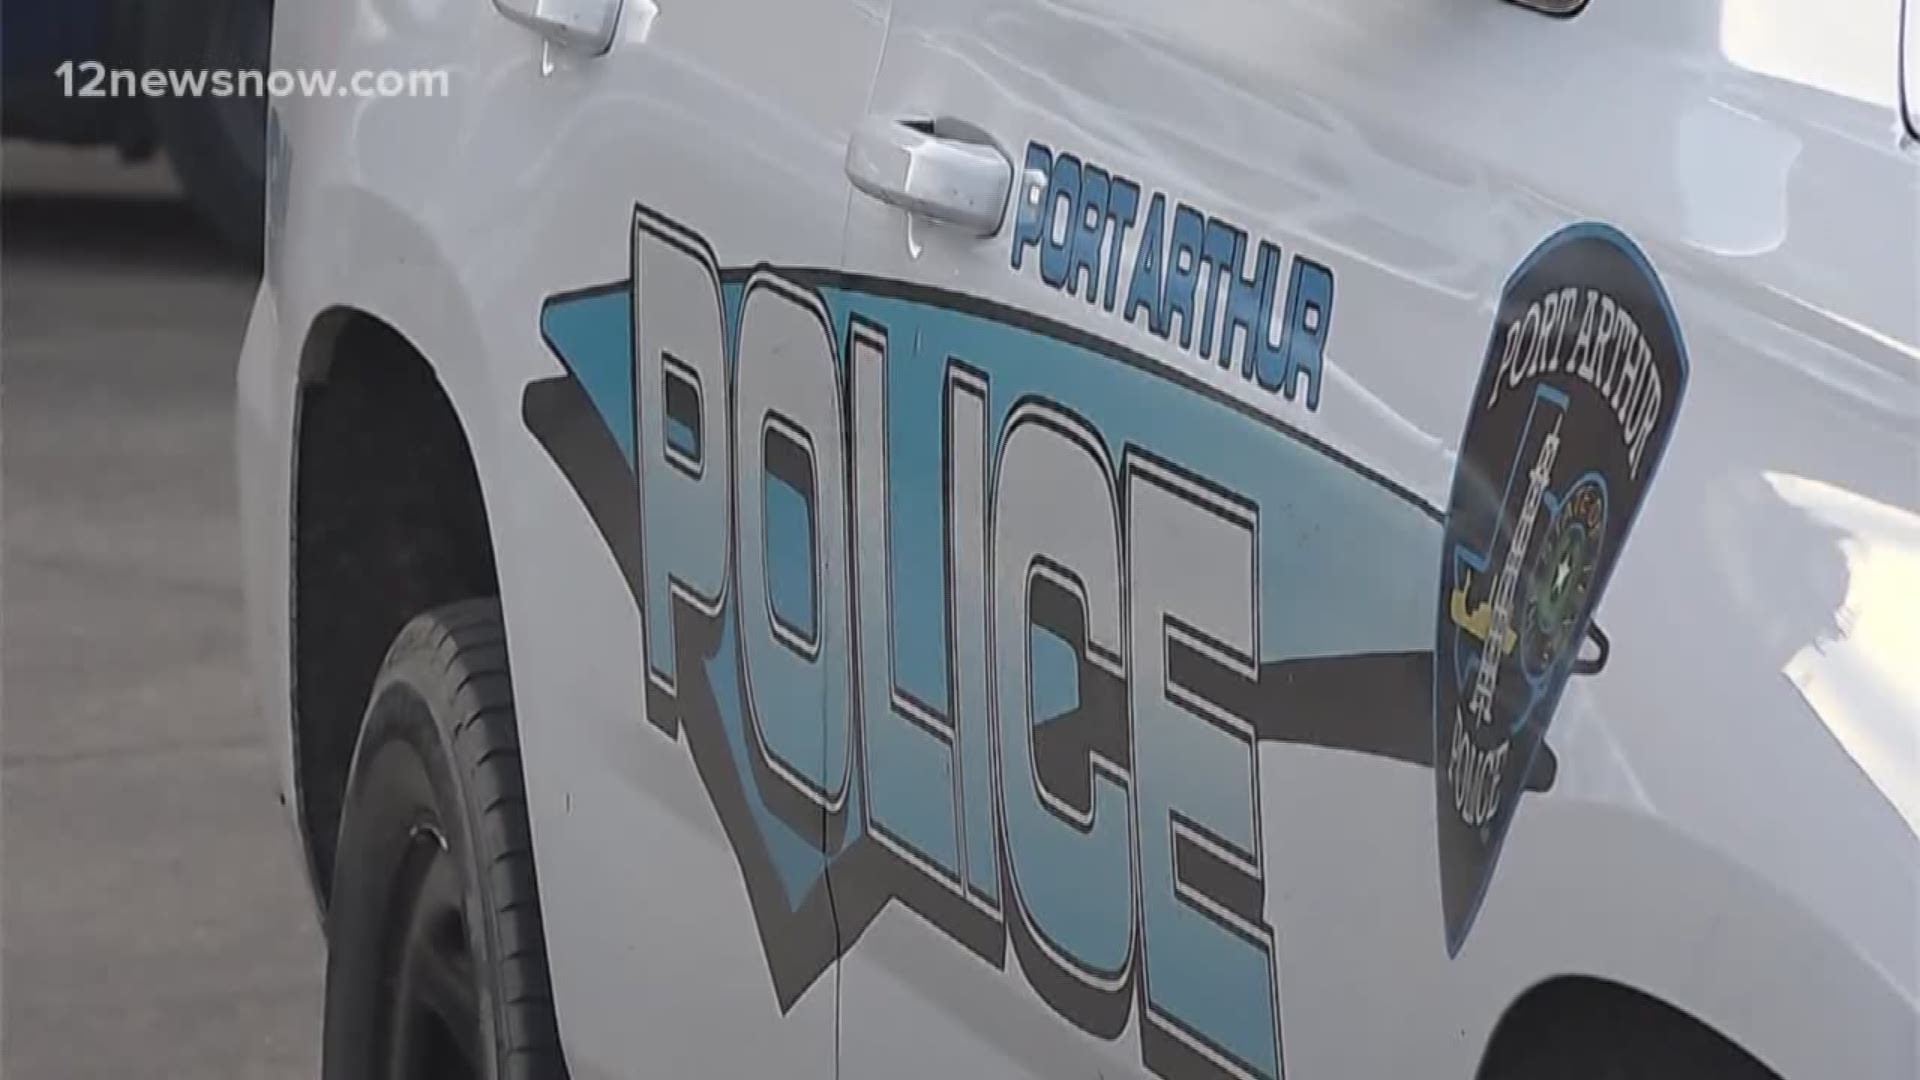 The crime response unit in Port Arthur was established two-and-a-half months ago and has seen a decline in some crimes.